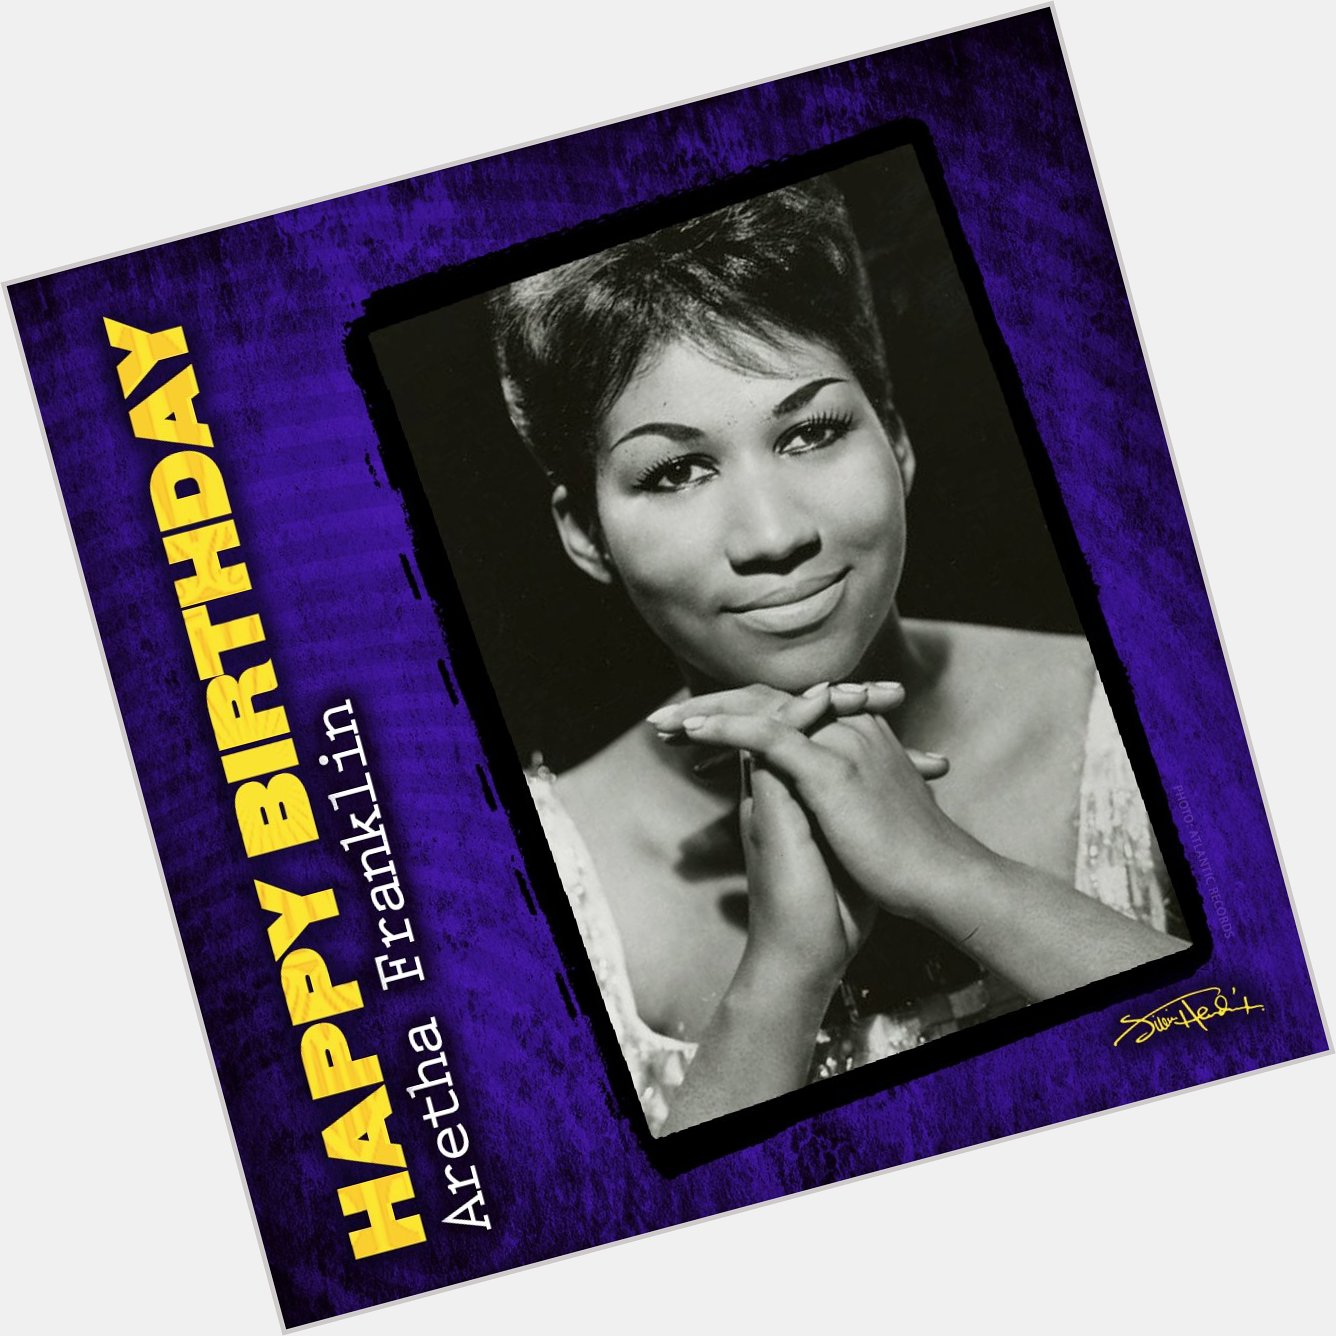 Happy Birthday to the \"Queen Of Soul\" Aretha Franklin
March 25, 1942 - August 16, 2018 